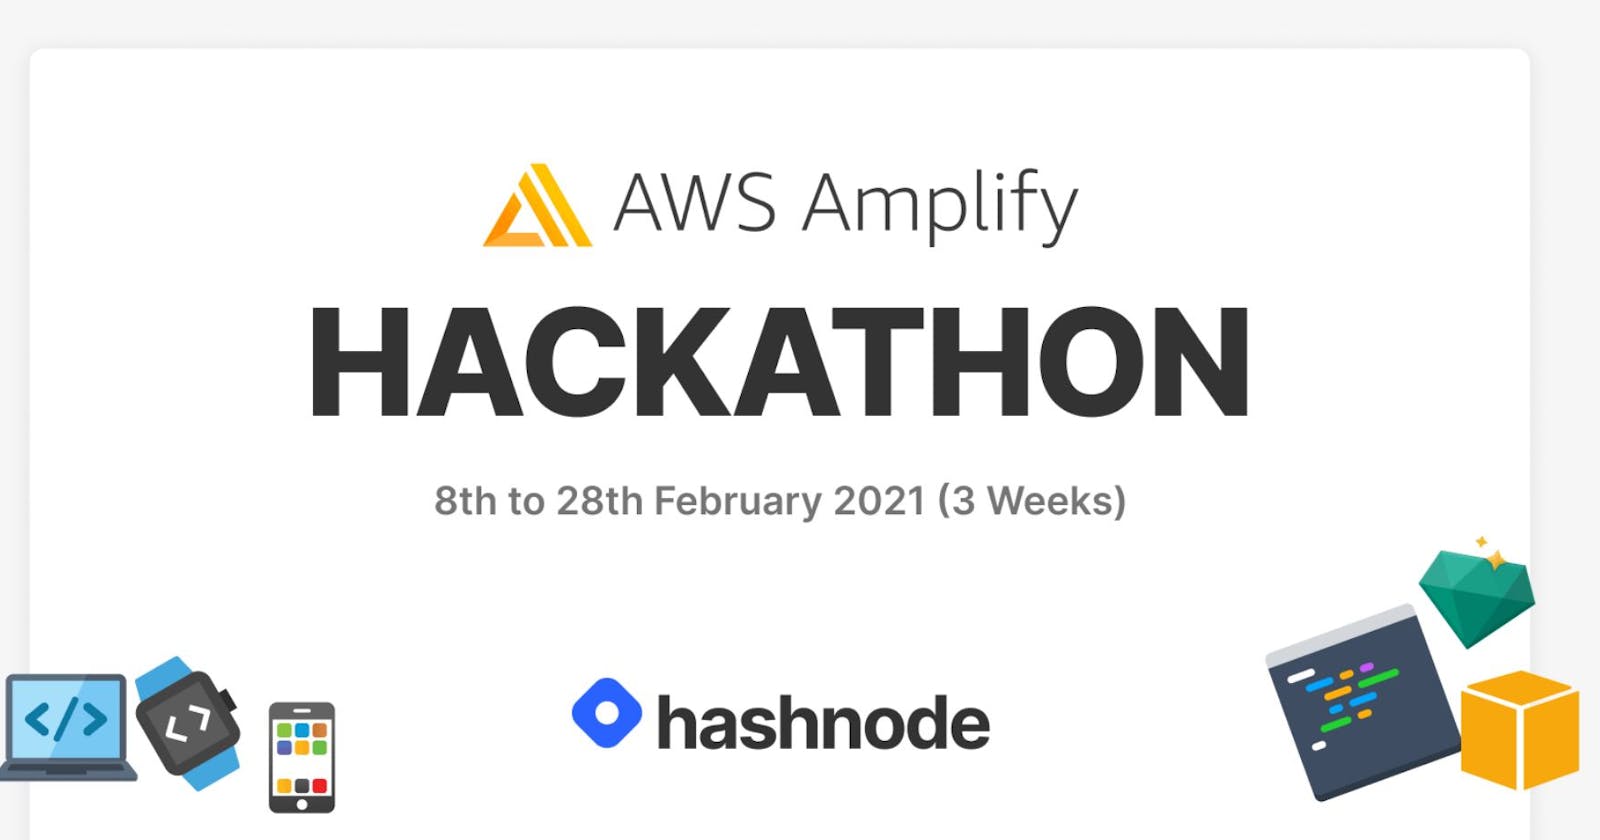 Aybow Fitness - My entry to the AWS Amplify Hackathon!